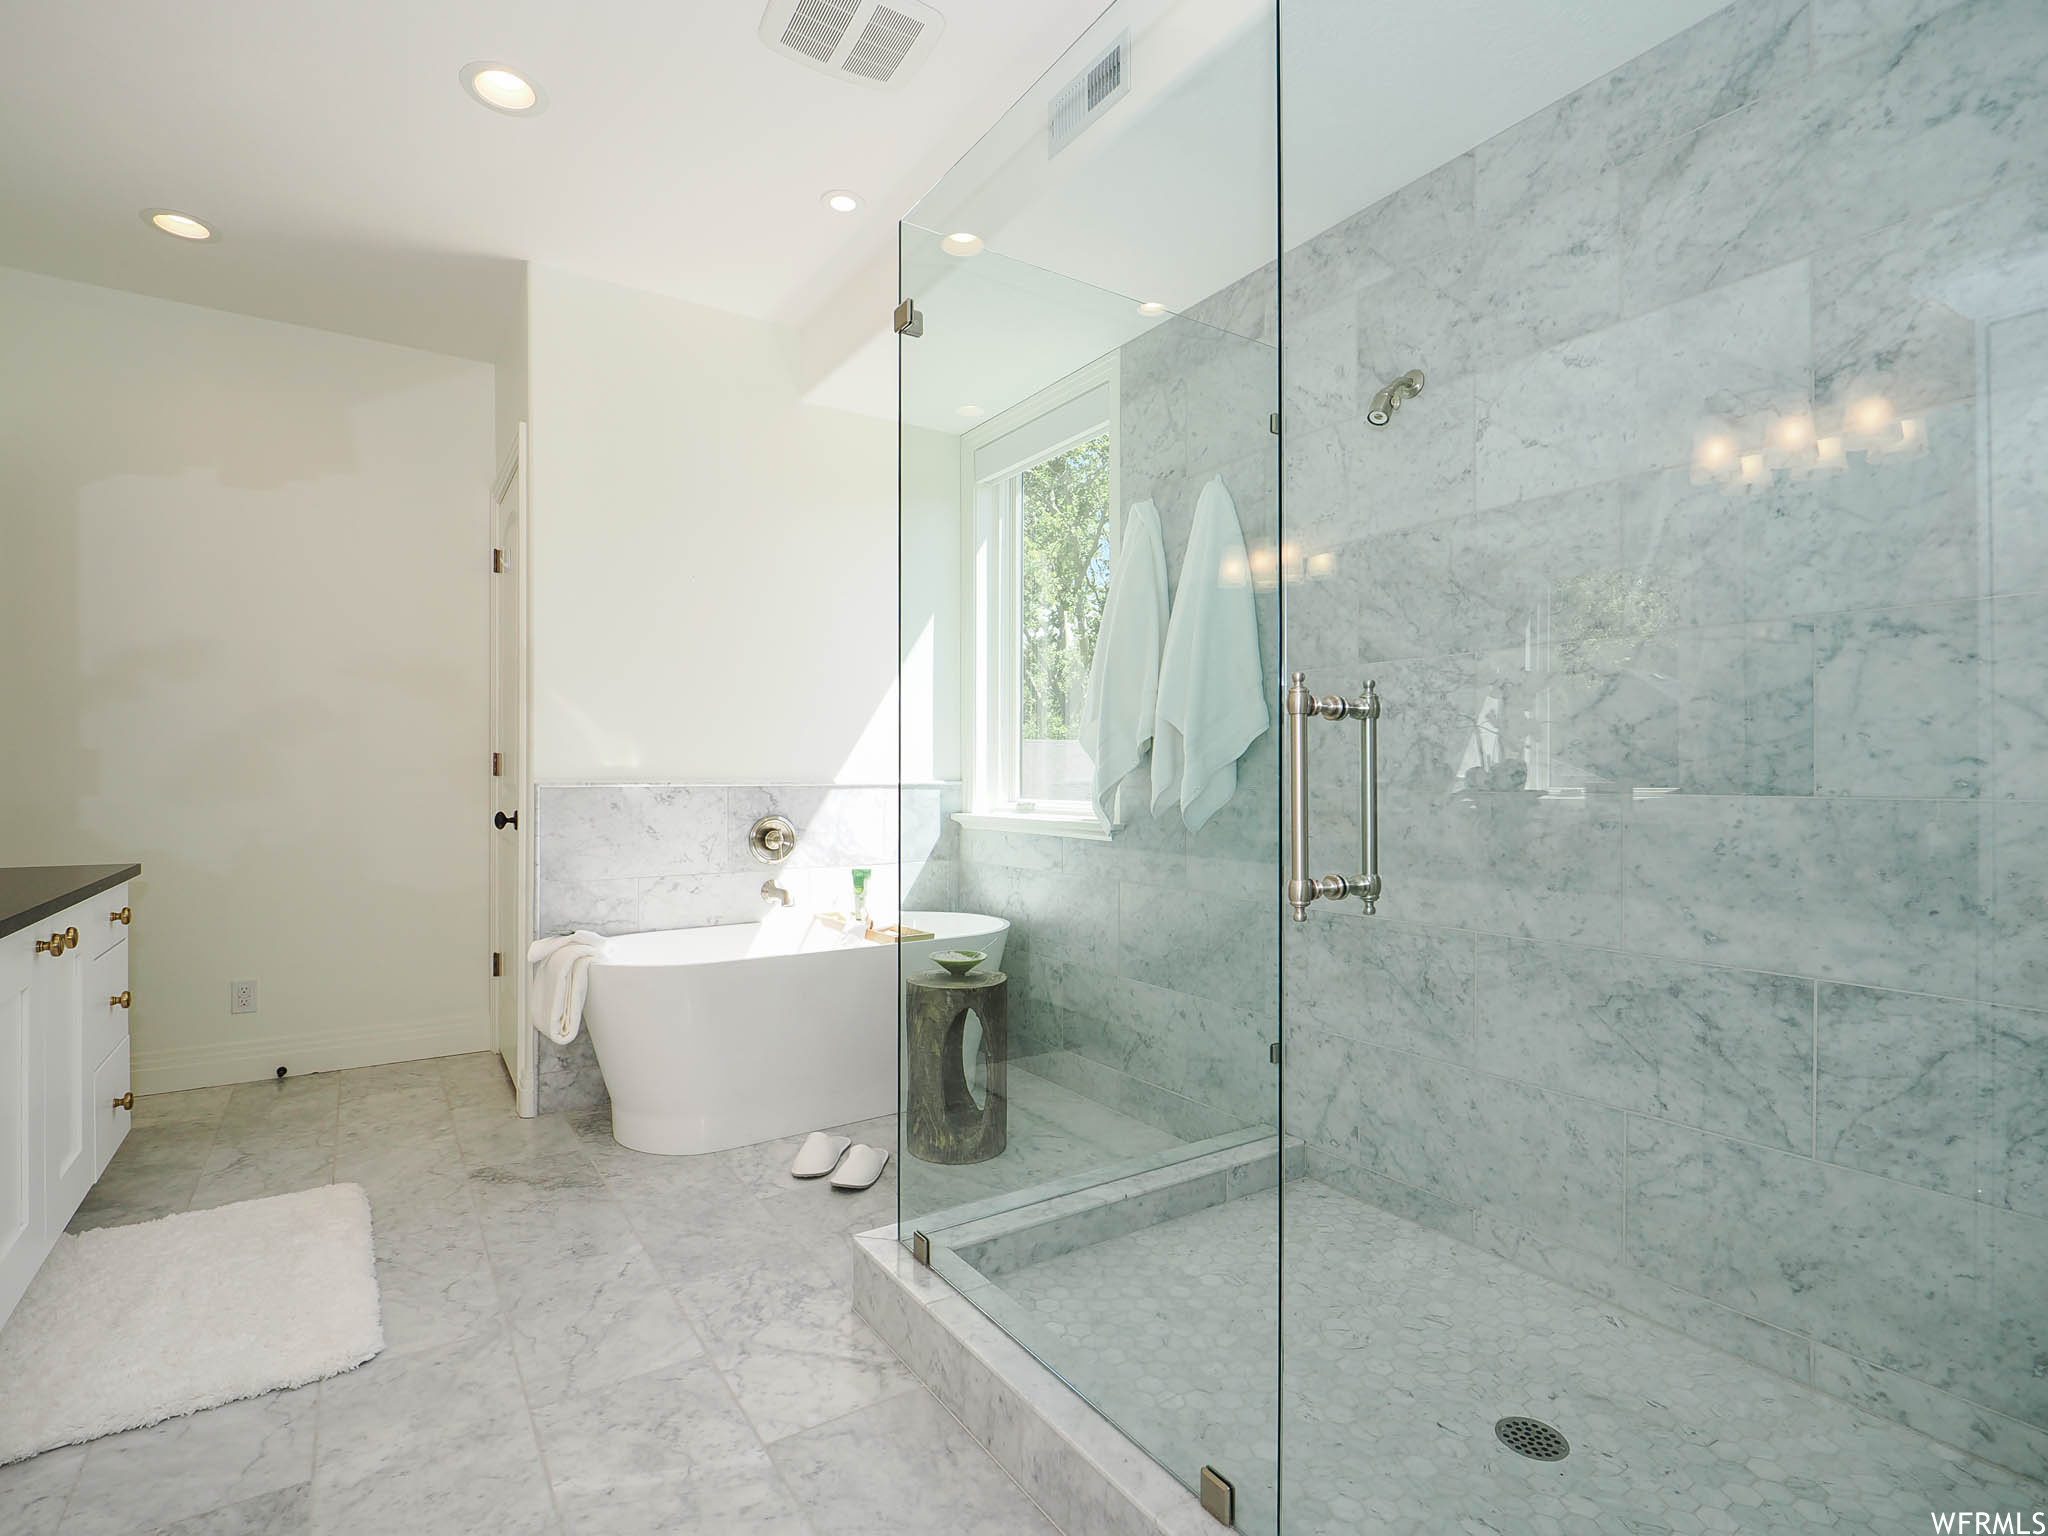 Bathroom featuring separate shower and tub, light tile floors, tile walls, and vanity